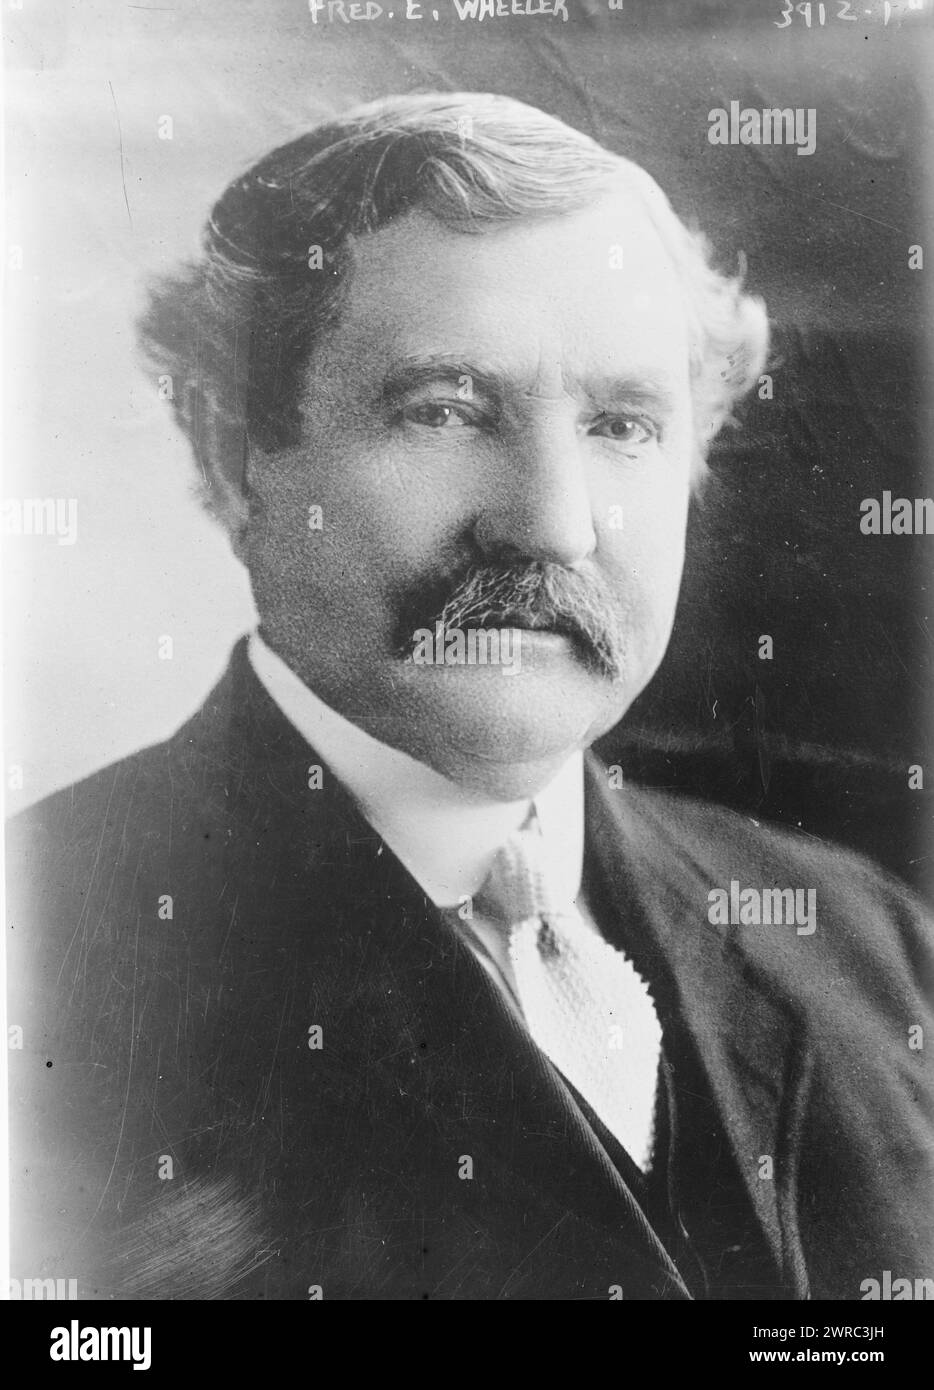 Fred. E. Wheeler, Photograph shows Frederick F. Wheeler who was a Prohibition candidate for the U.S. Senate from California., between ca. 1915 and ca. 1920, Glass negatives, 1 negative: glass Stock Photo